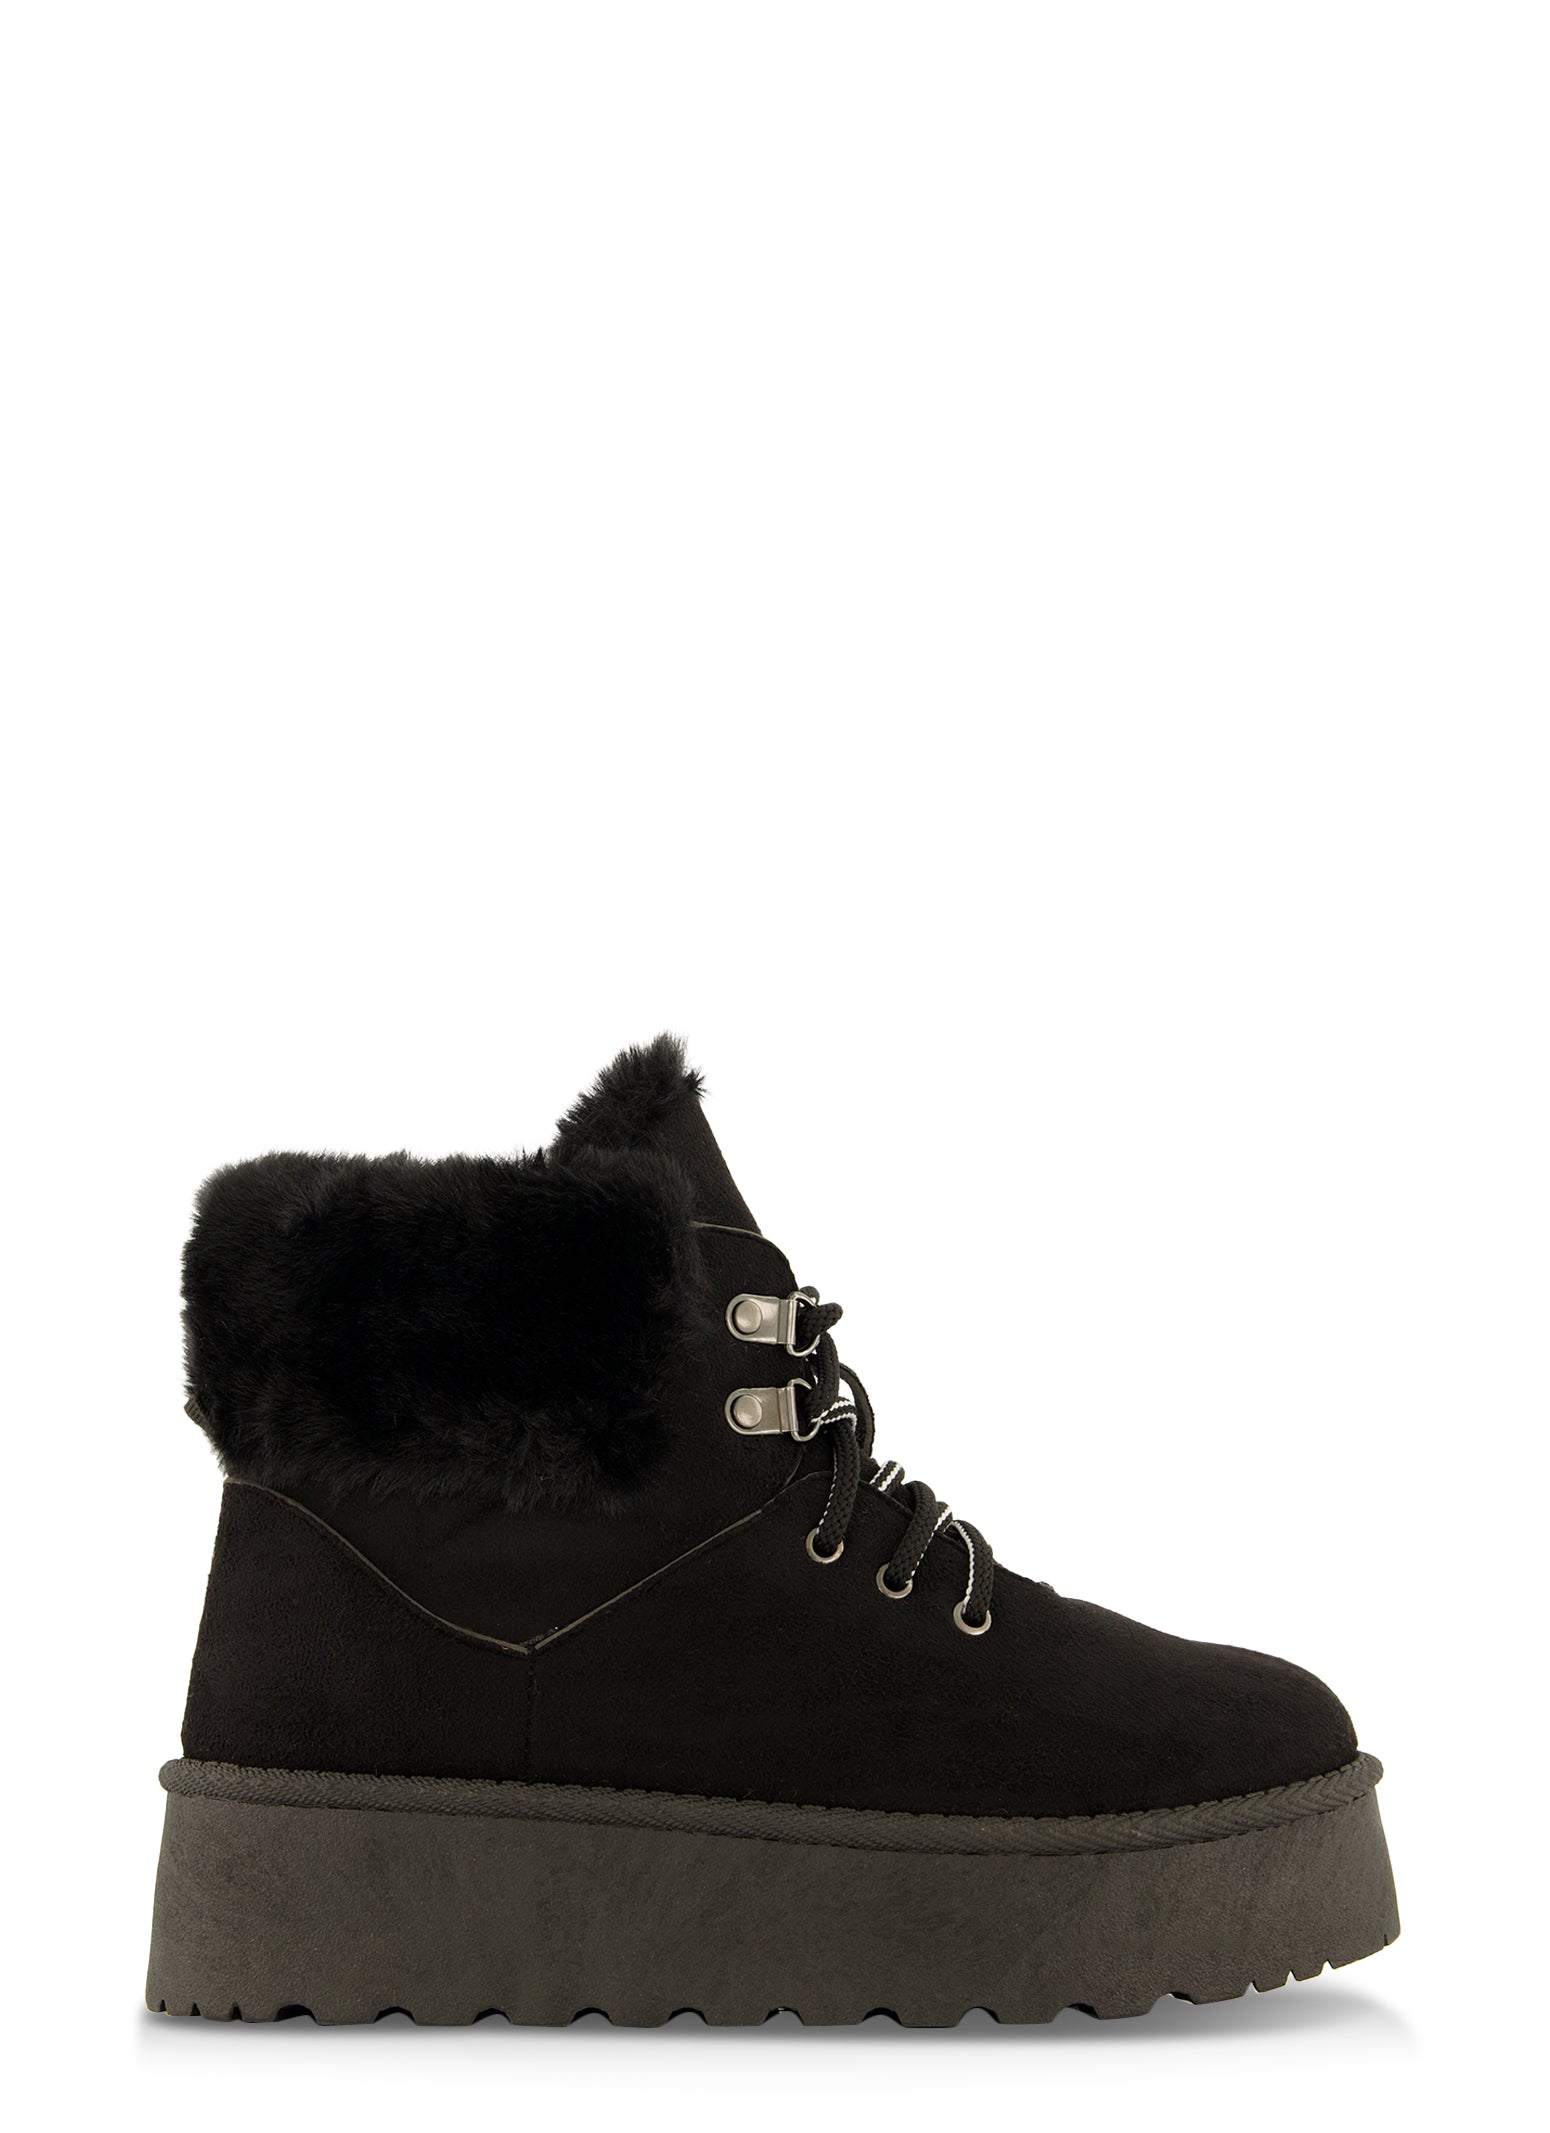 Womens Faux Fur Lined Lace Up Platform Booties,